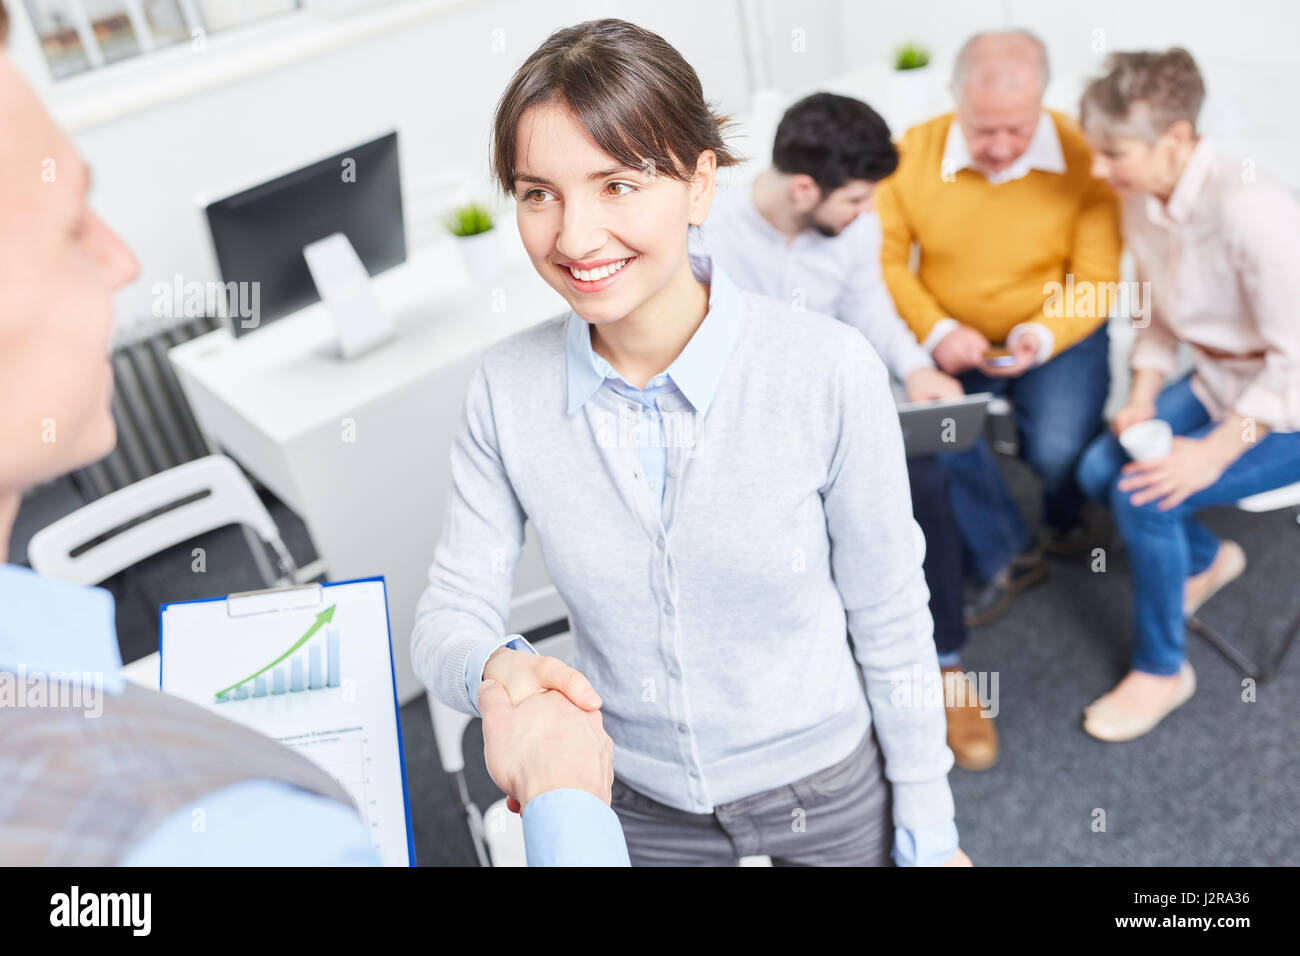 Young woman as job application candidate for business consulting trainee programm Stock Photo